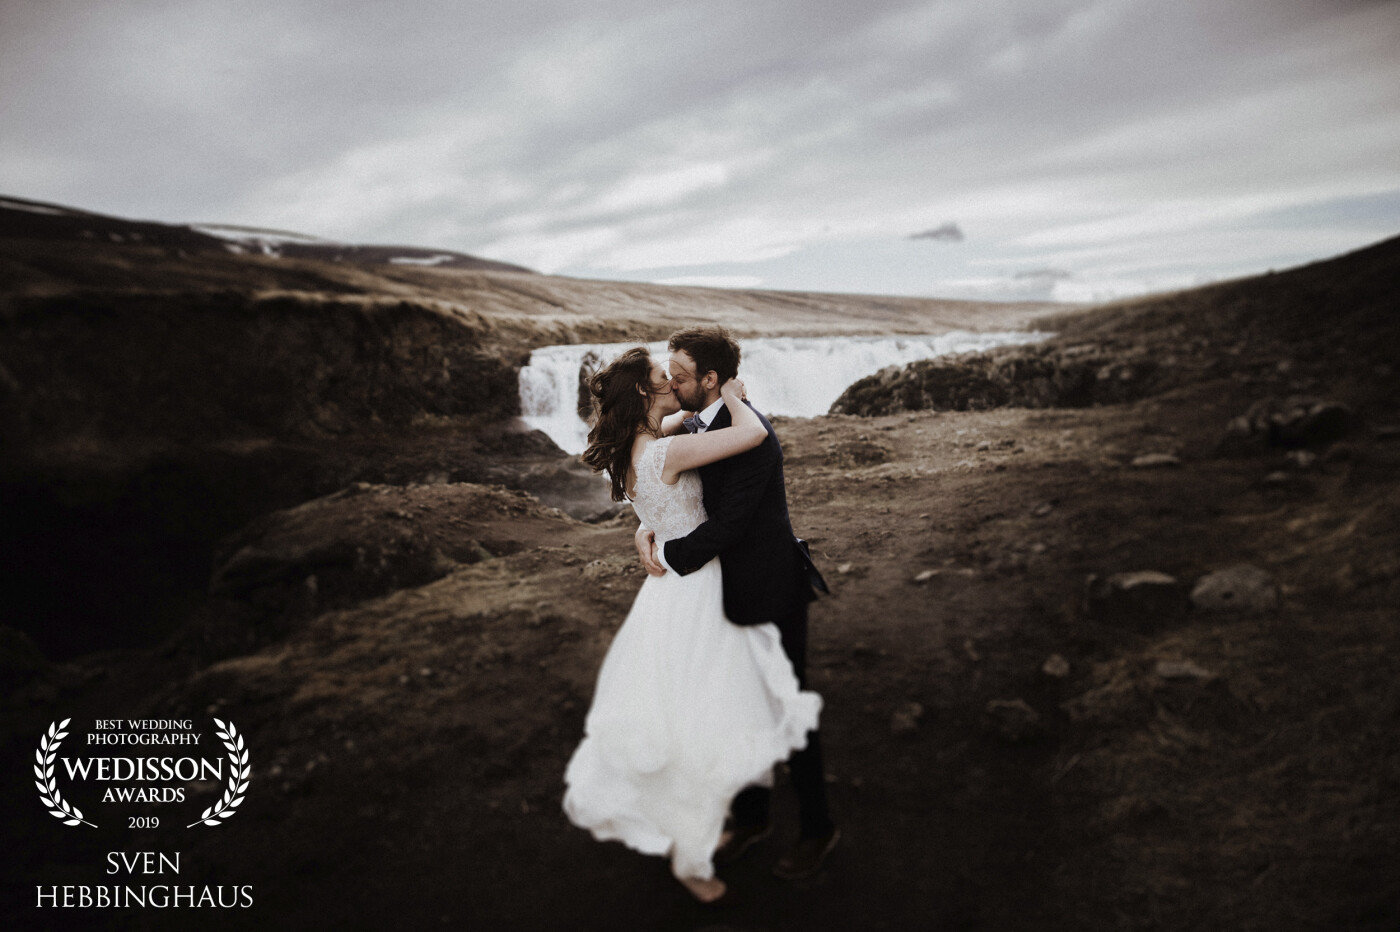 Stormy weather. A beautiful couple and a waterfall in Iceland. That is all I need for a great shot with this bridal couple. The day was perfect and these two lovers inspired me so much!